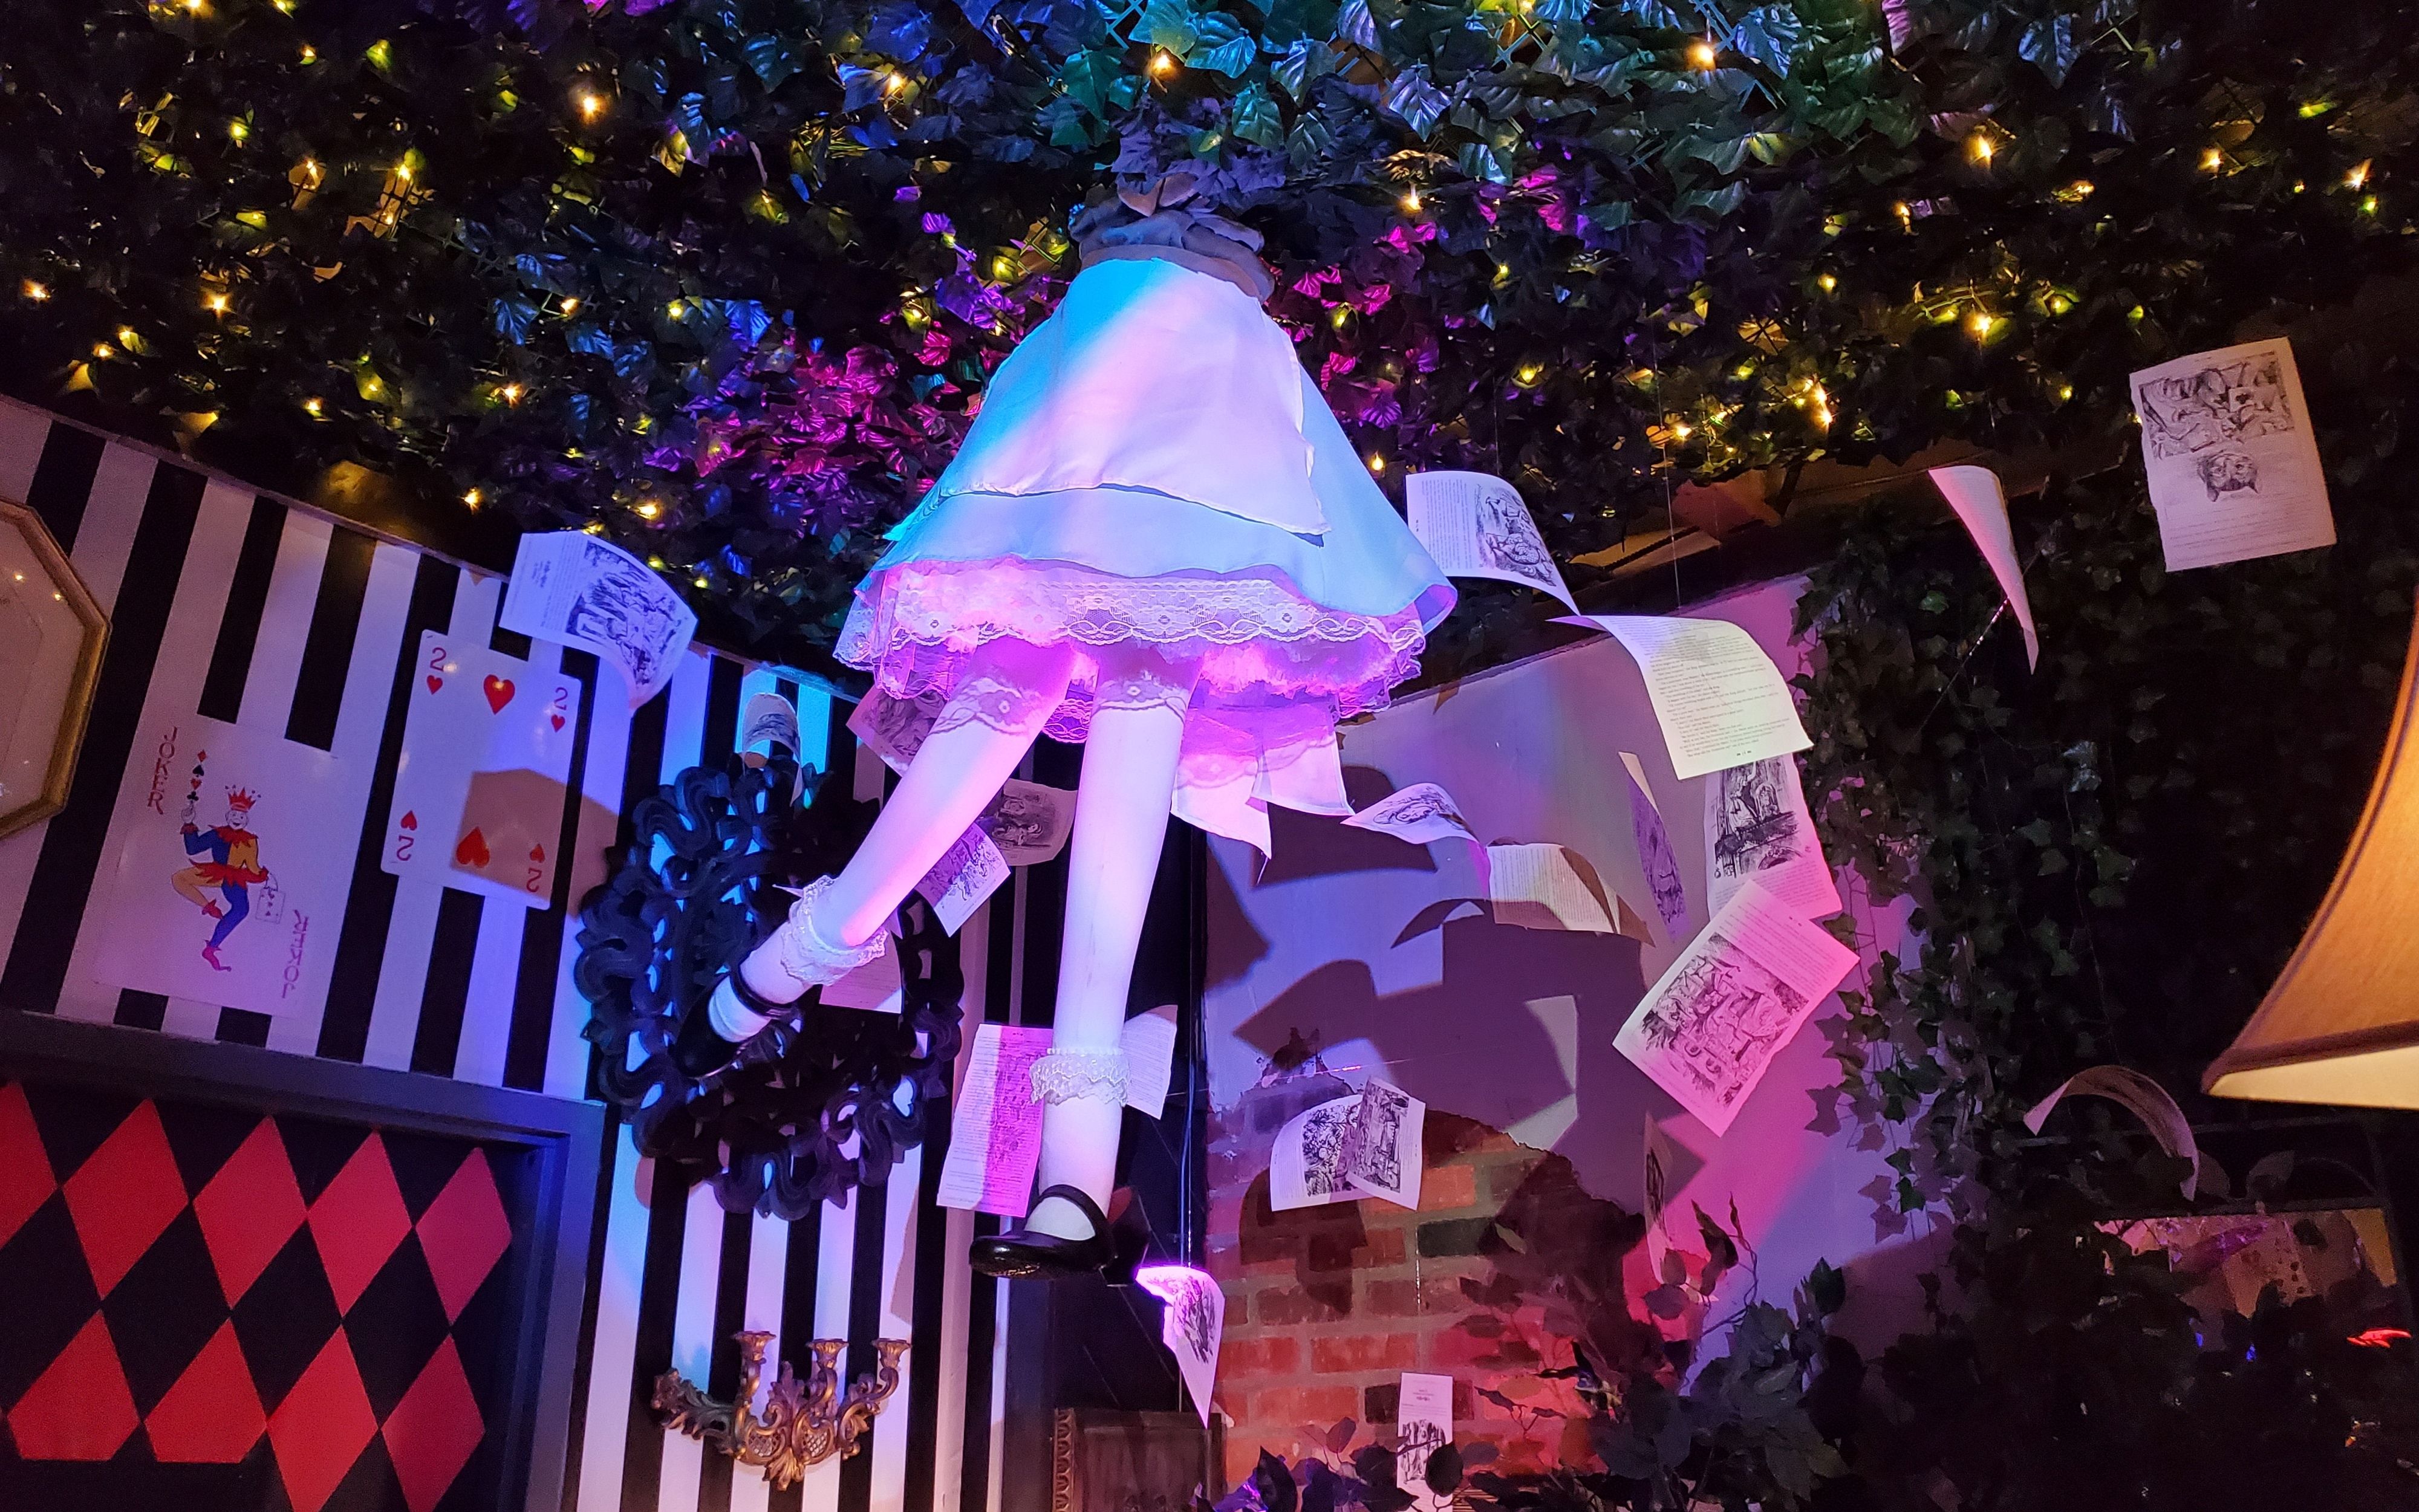 A mannequin of Alice in Wonderland's lower half and feet "falling" through a leaf-covered ceiling, surrounded by suspended book pages